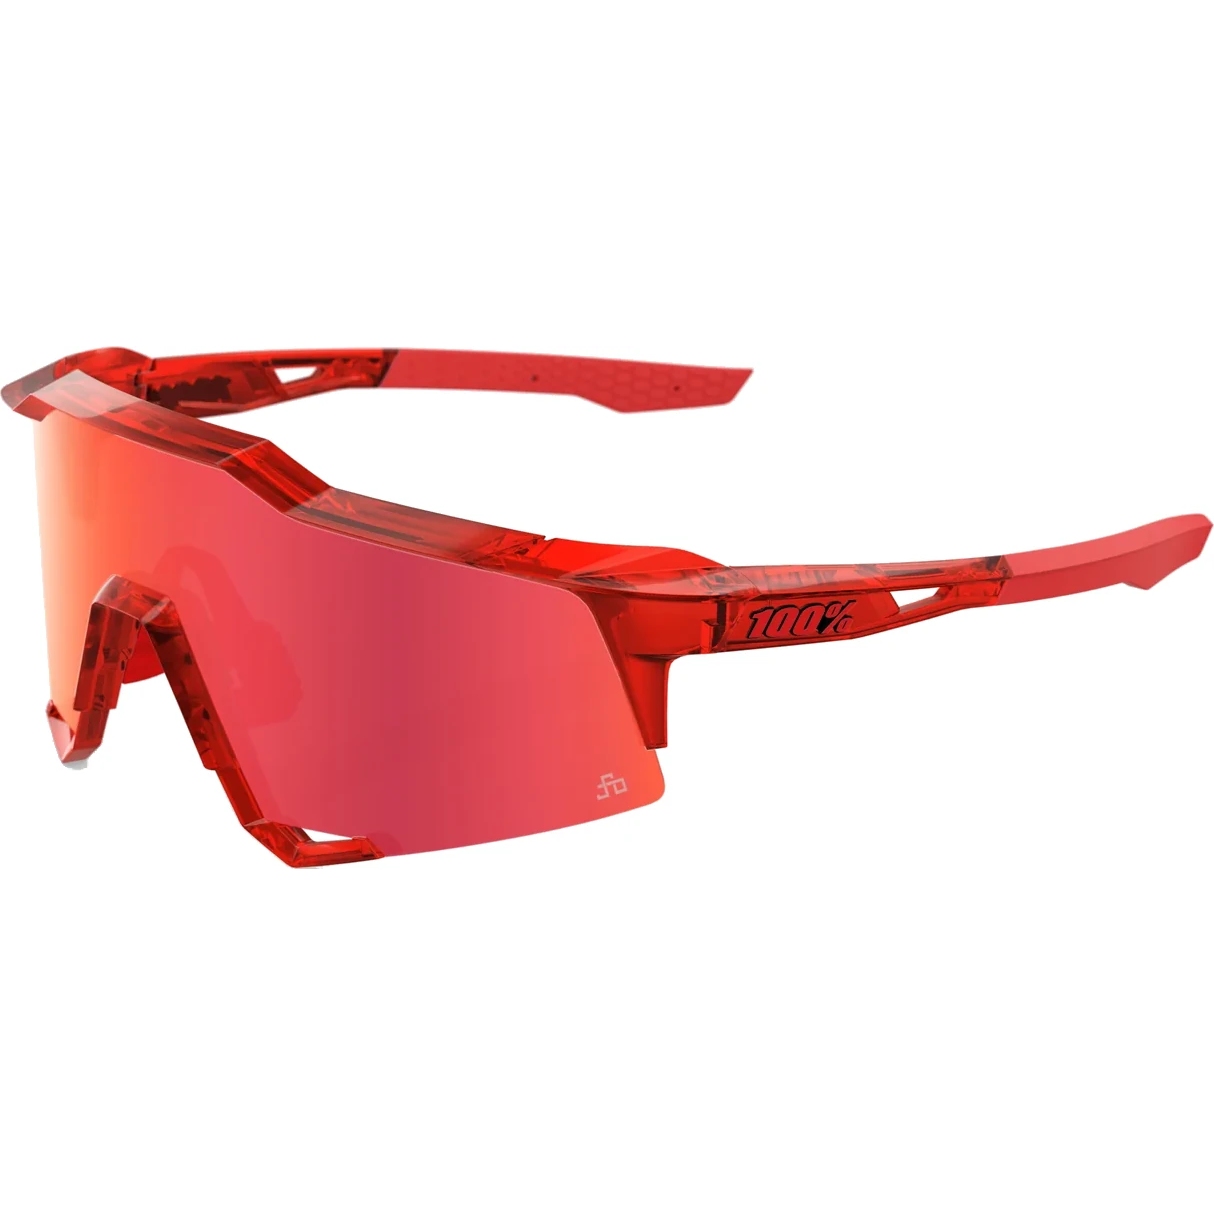 Picture of 100% Speedcraft LE Glasses - HiPER Red Mirror Lens - Peter Sagan Limited Edition - Translucent Red